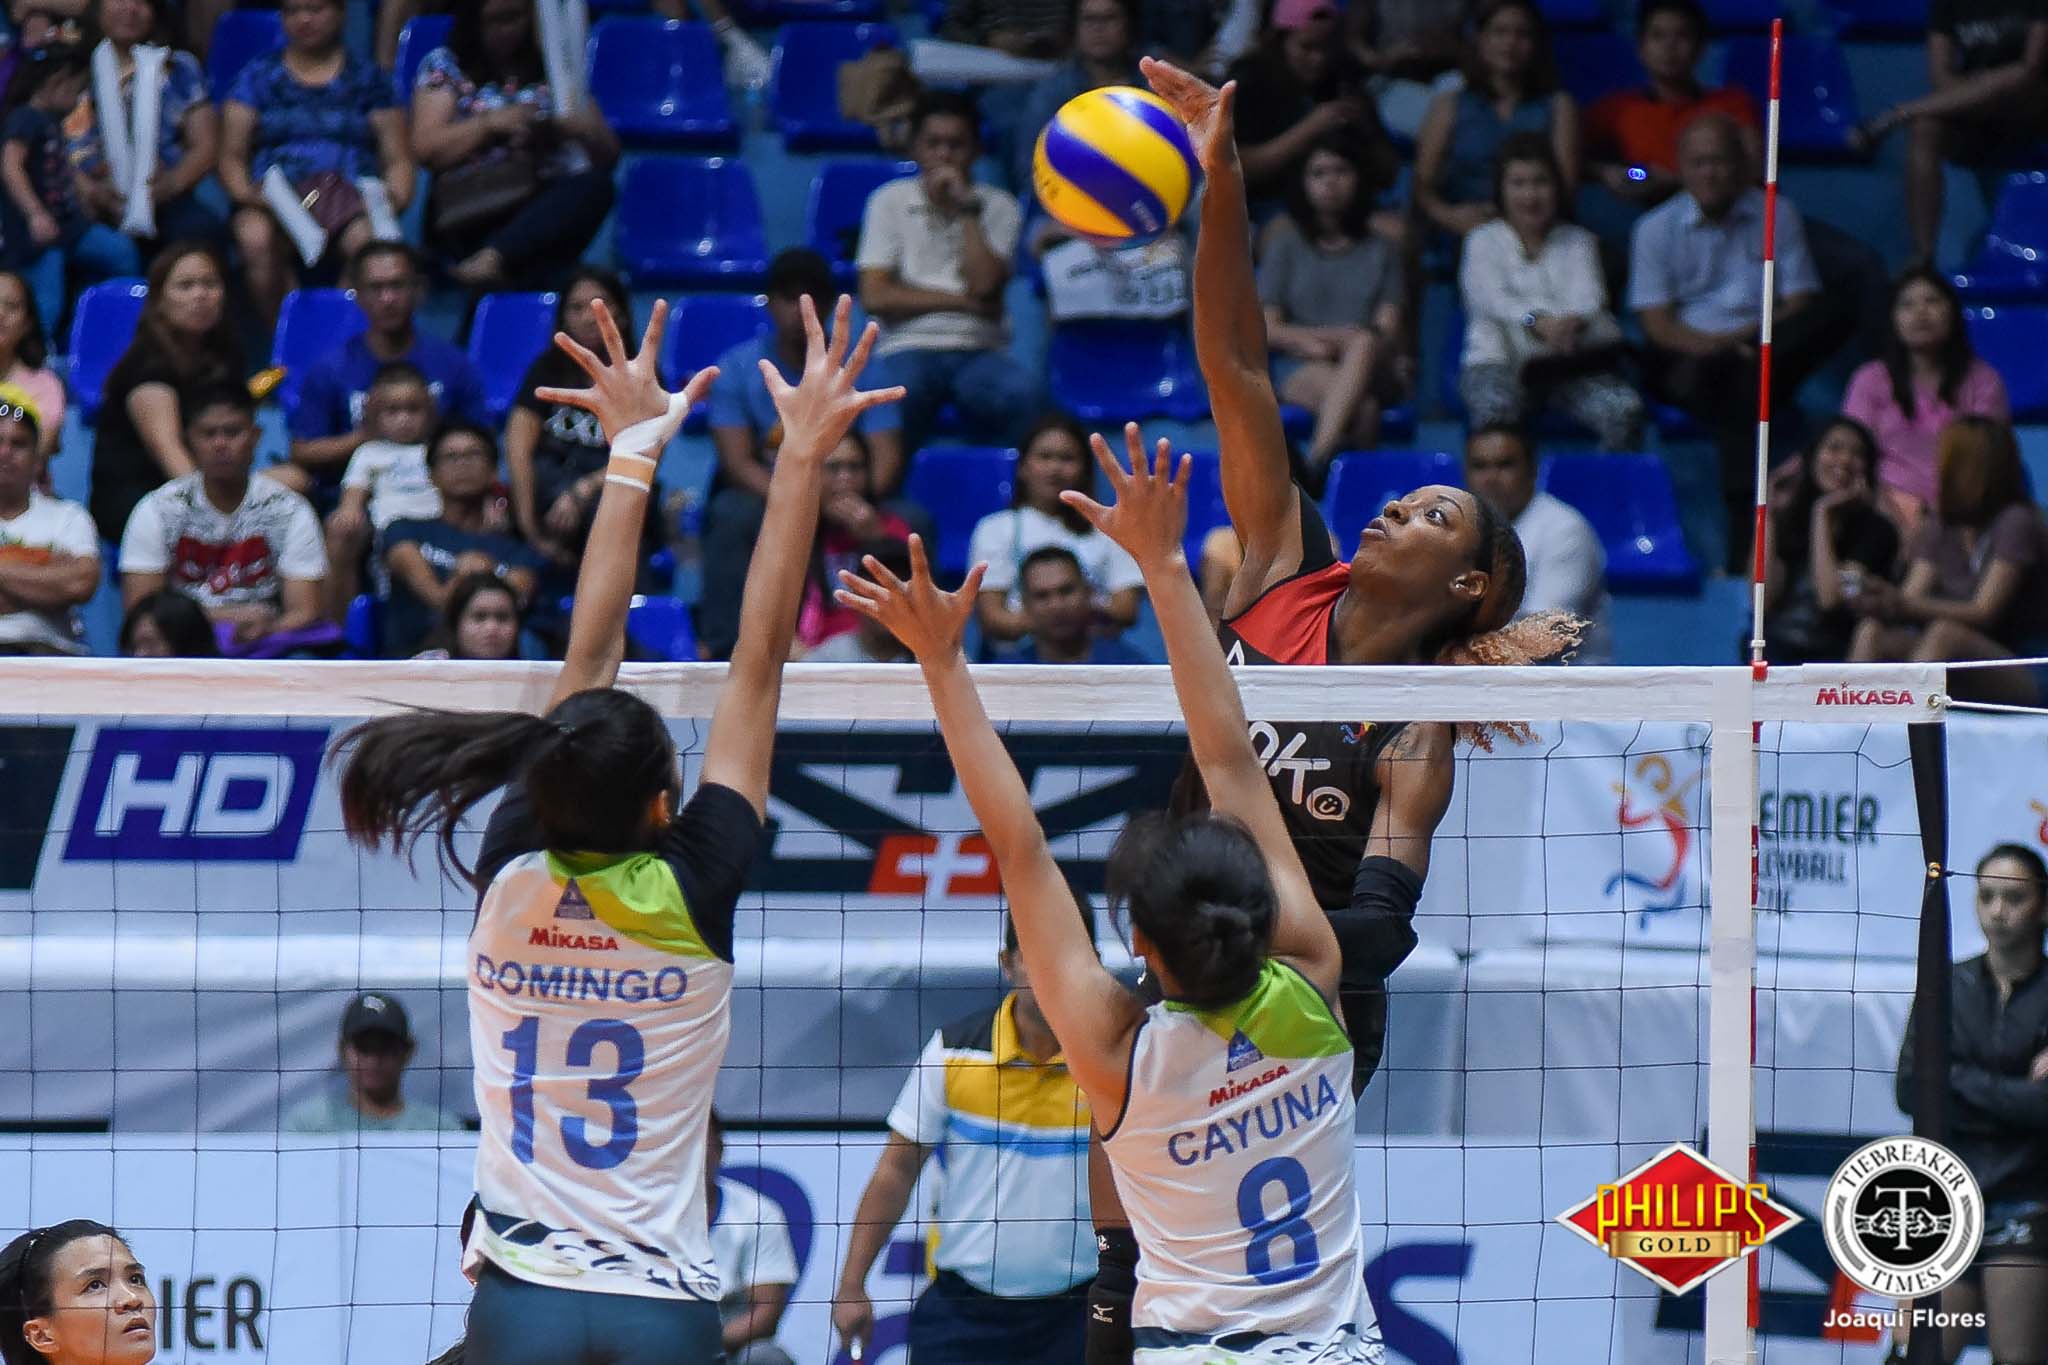 PVL-Semis-Banko-Perlas-vs.-Paymaya-Bright-9645 Pris Rivera joins elite group after record-breaking PVL performance News PSL PVL Volleyball  - philippine sports news